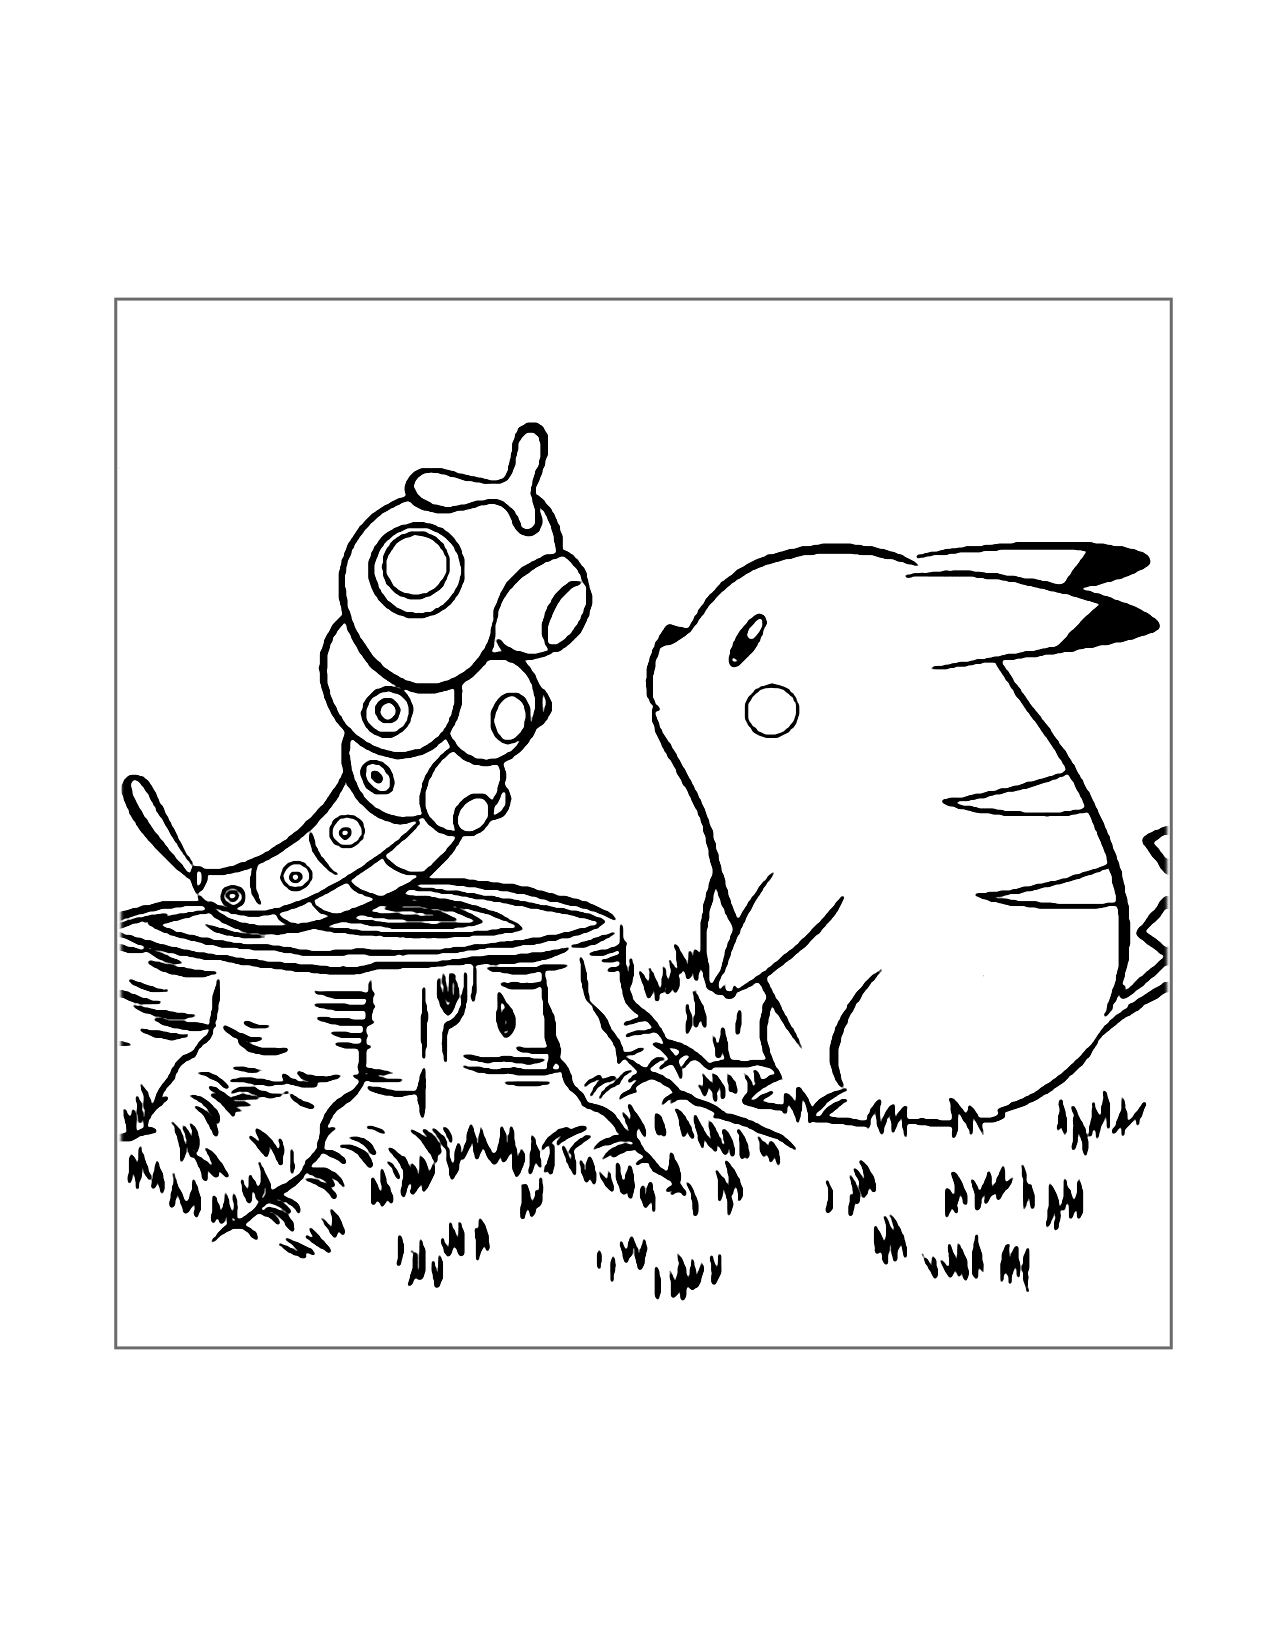 Pikachu Meets Caterpie Coloring Page